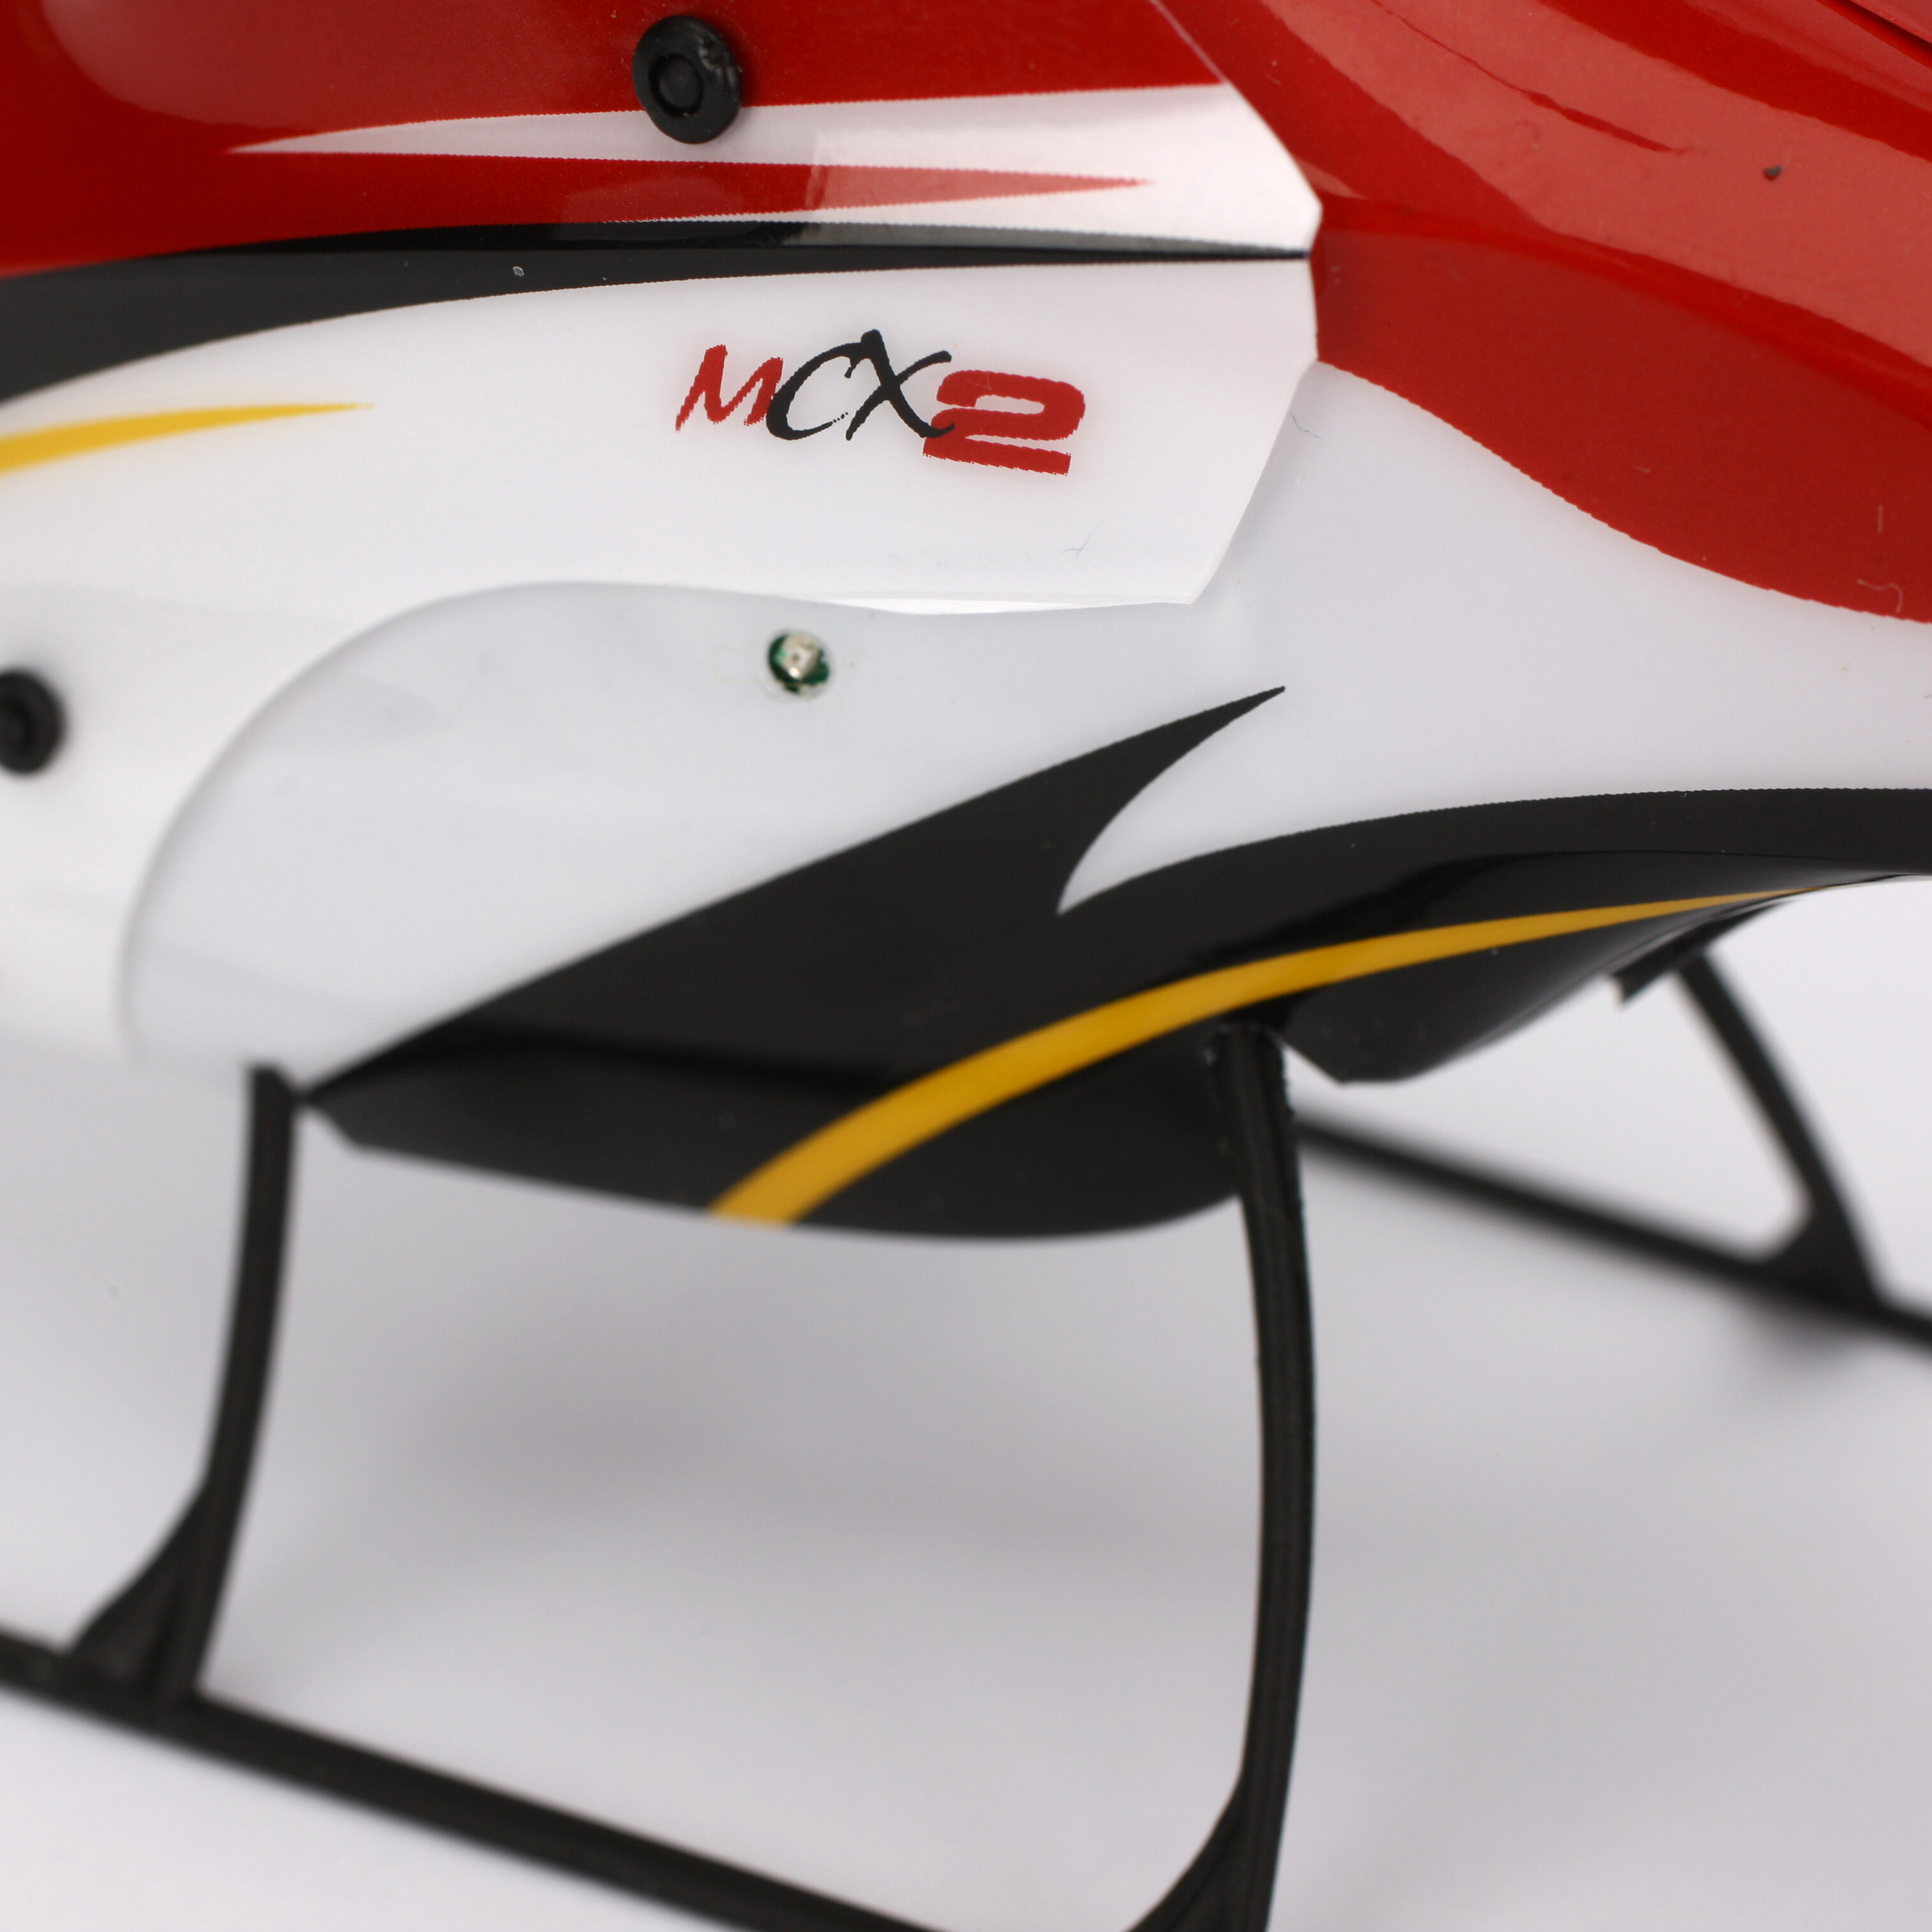 blade mcx2 rc helicopter